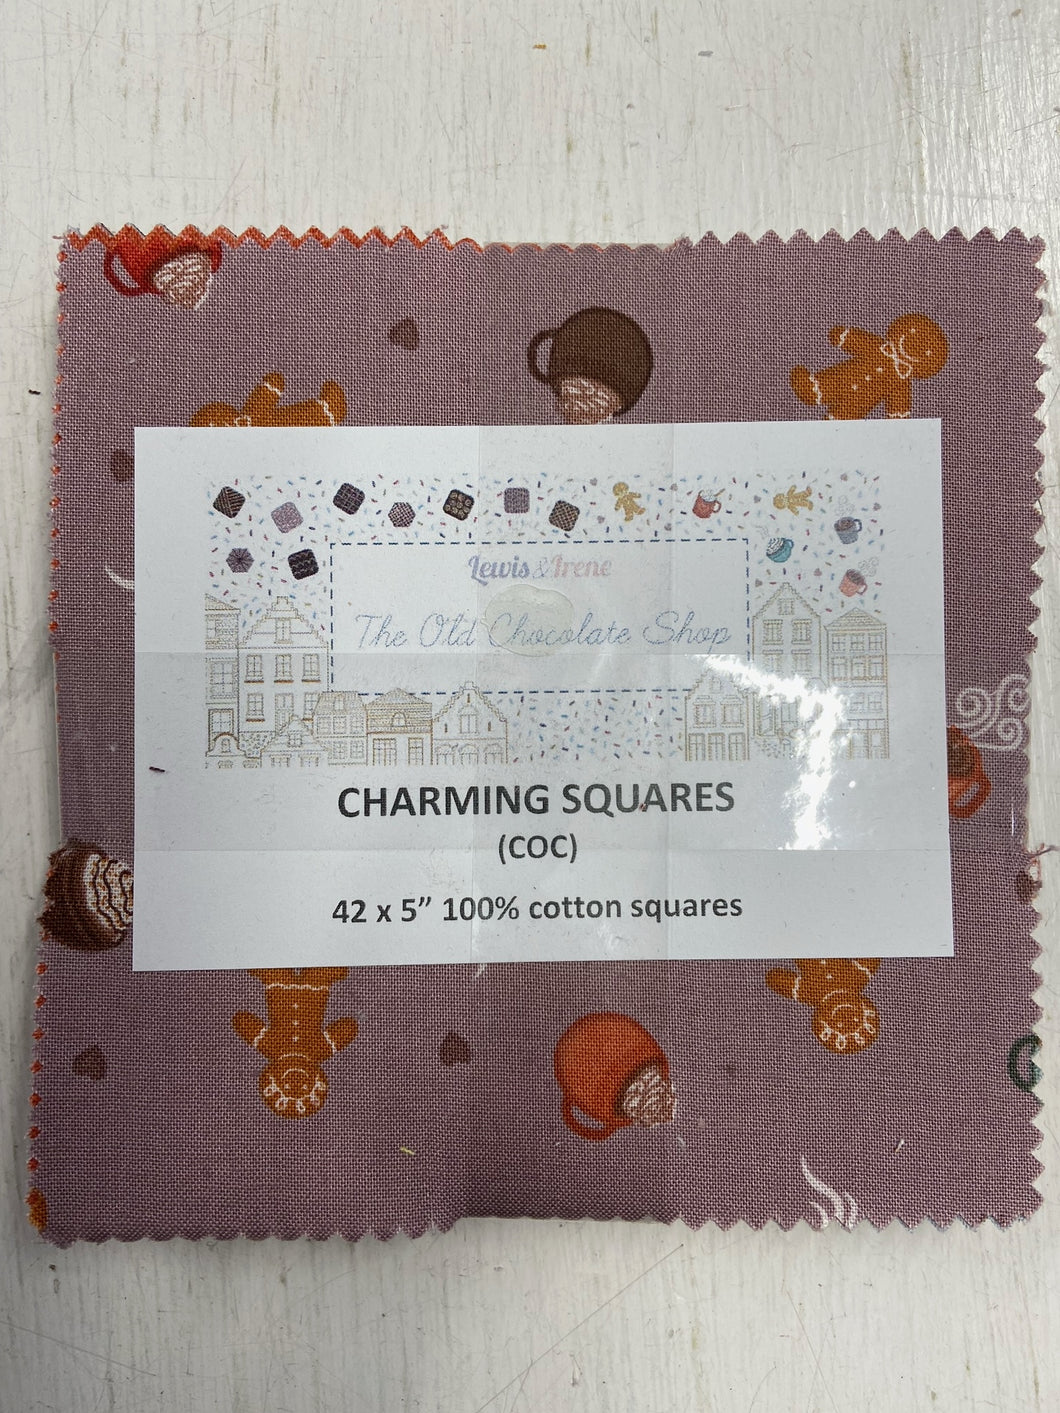 lewis and & irene charming squares charm pack pre-cut five inch squares the old chocolate shop cotton fabric shack malmesbury